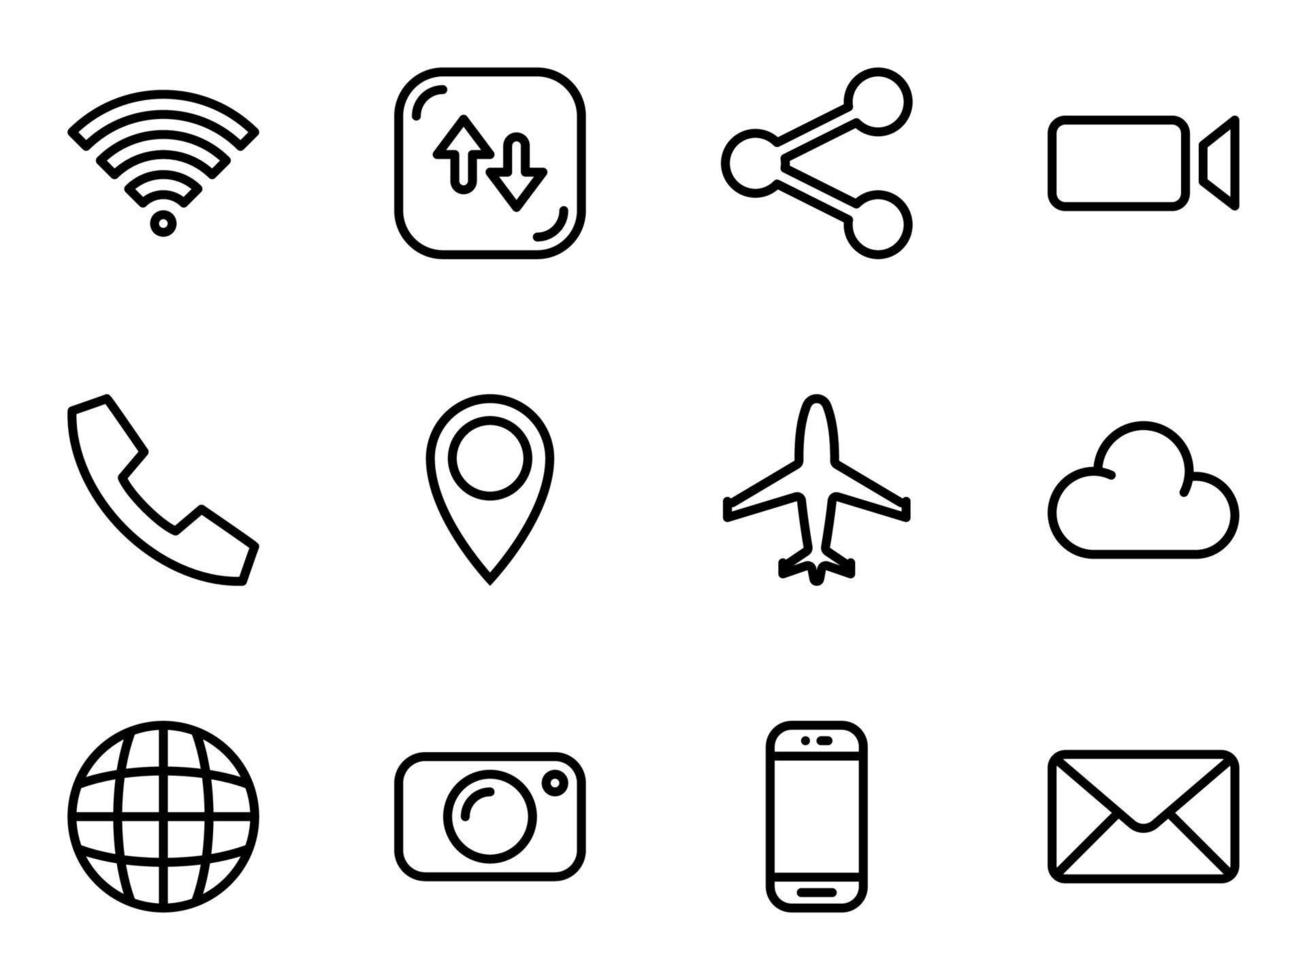 Set of black vector icons, isolated against white background. Flat illustration on a theme web icons for computer, phone, tablet, laptop. Line, outline, stroke